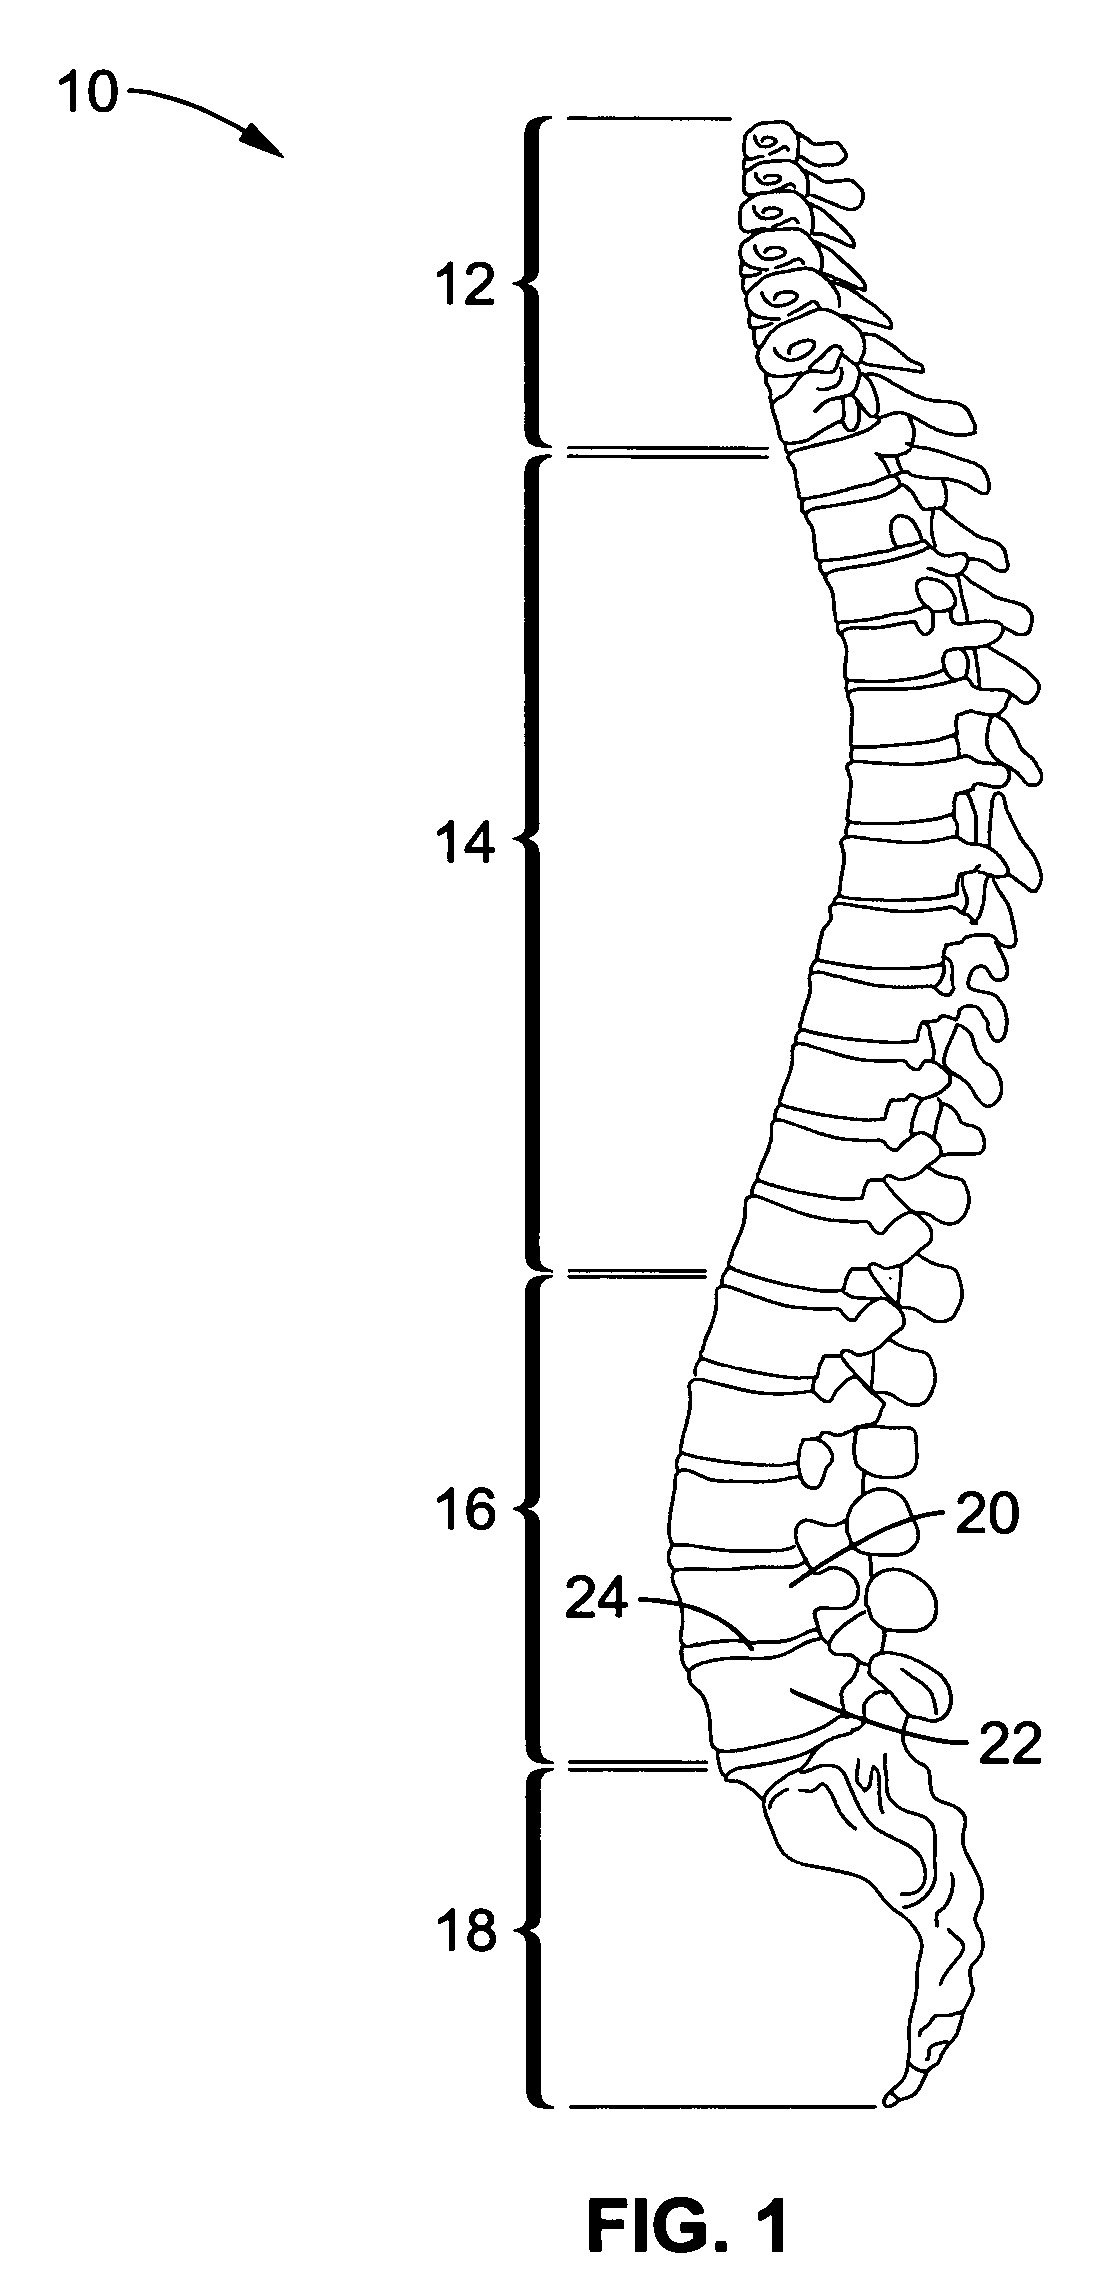 Spine microsurgery techniques, training aids and implants